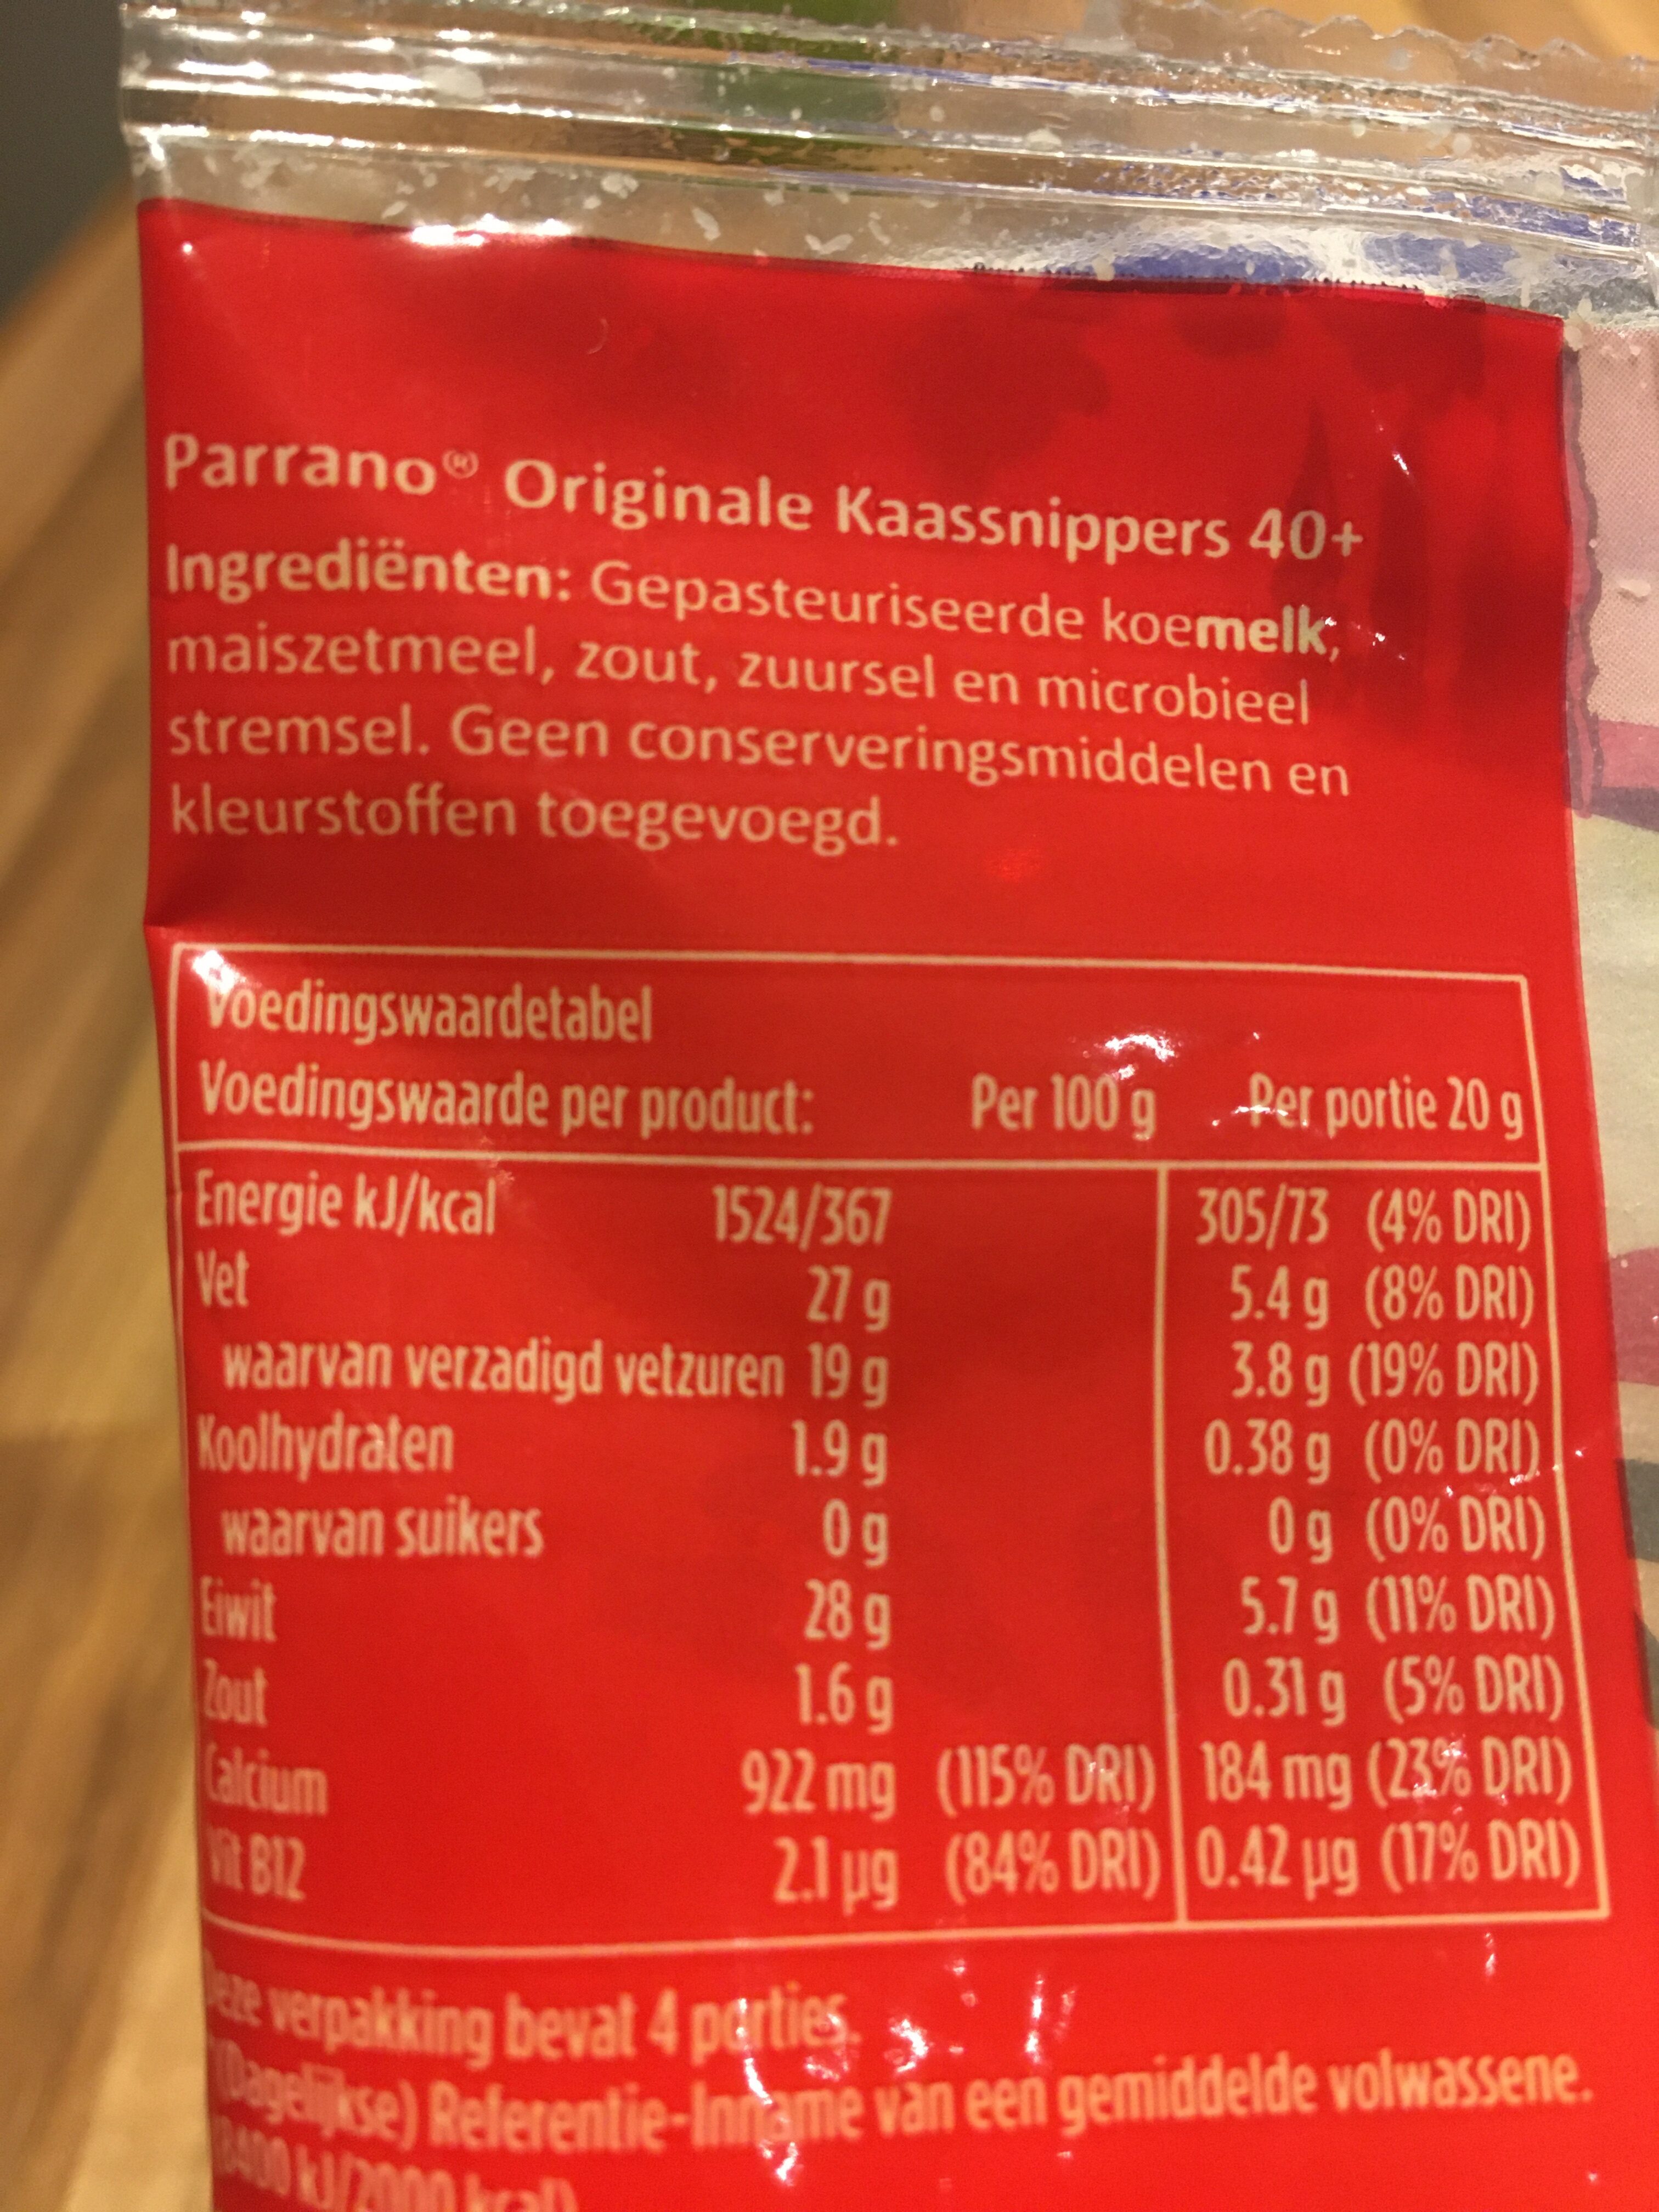 Parrano Originale Kaassnippers 40+ - Nutrition facts - nl